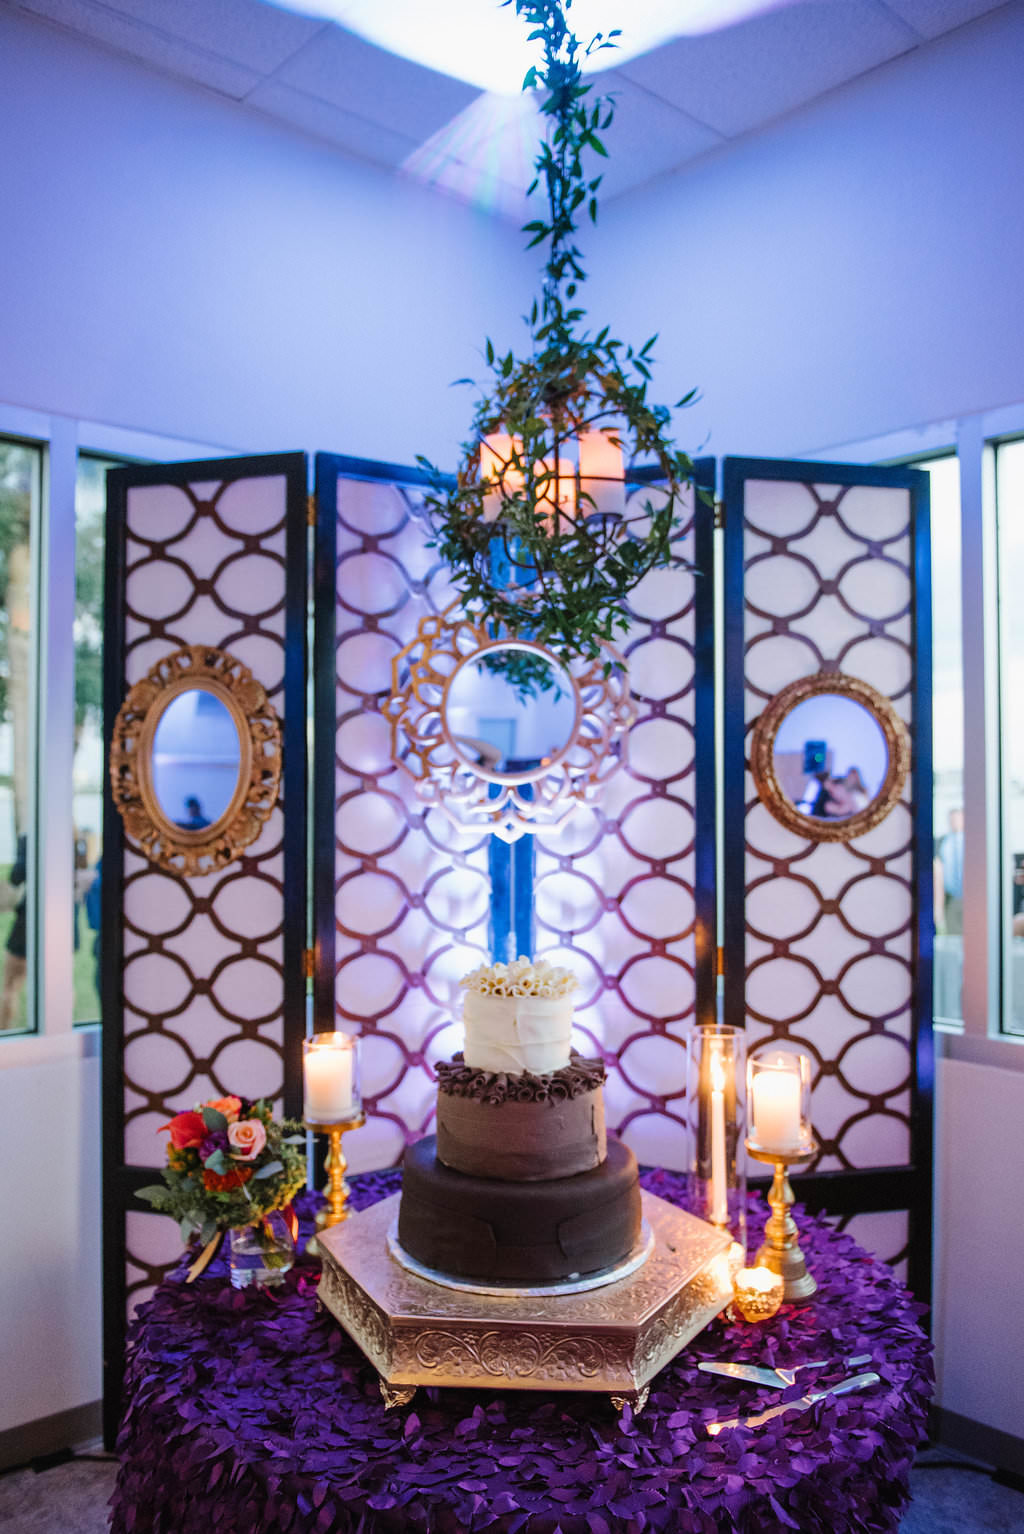 Whimsical Jewel Tone Wedding Dessert Table with Three Tier Round White, Milk, and Dark Chocolate Wedding Cake on Gold Octagonal Cake Stand on Purple Textured Linen with Pillar Candles, Hanging Greenery Wreath, and Vintage Pink, Gold and Black Screen | Tampa Bay Wedding Dessert Bakery A Piece of Cake | Clearwater, FL Wedding Planner Special Moments Event Planning